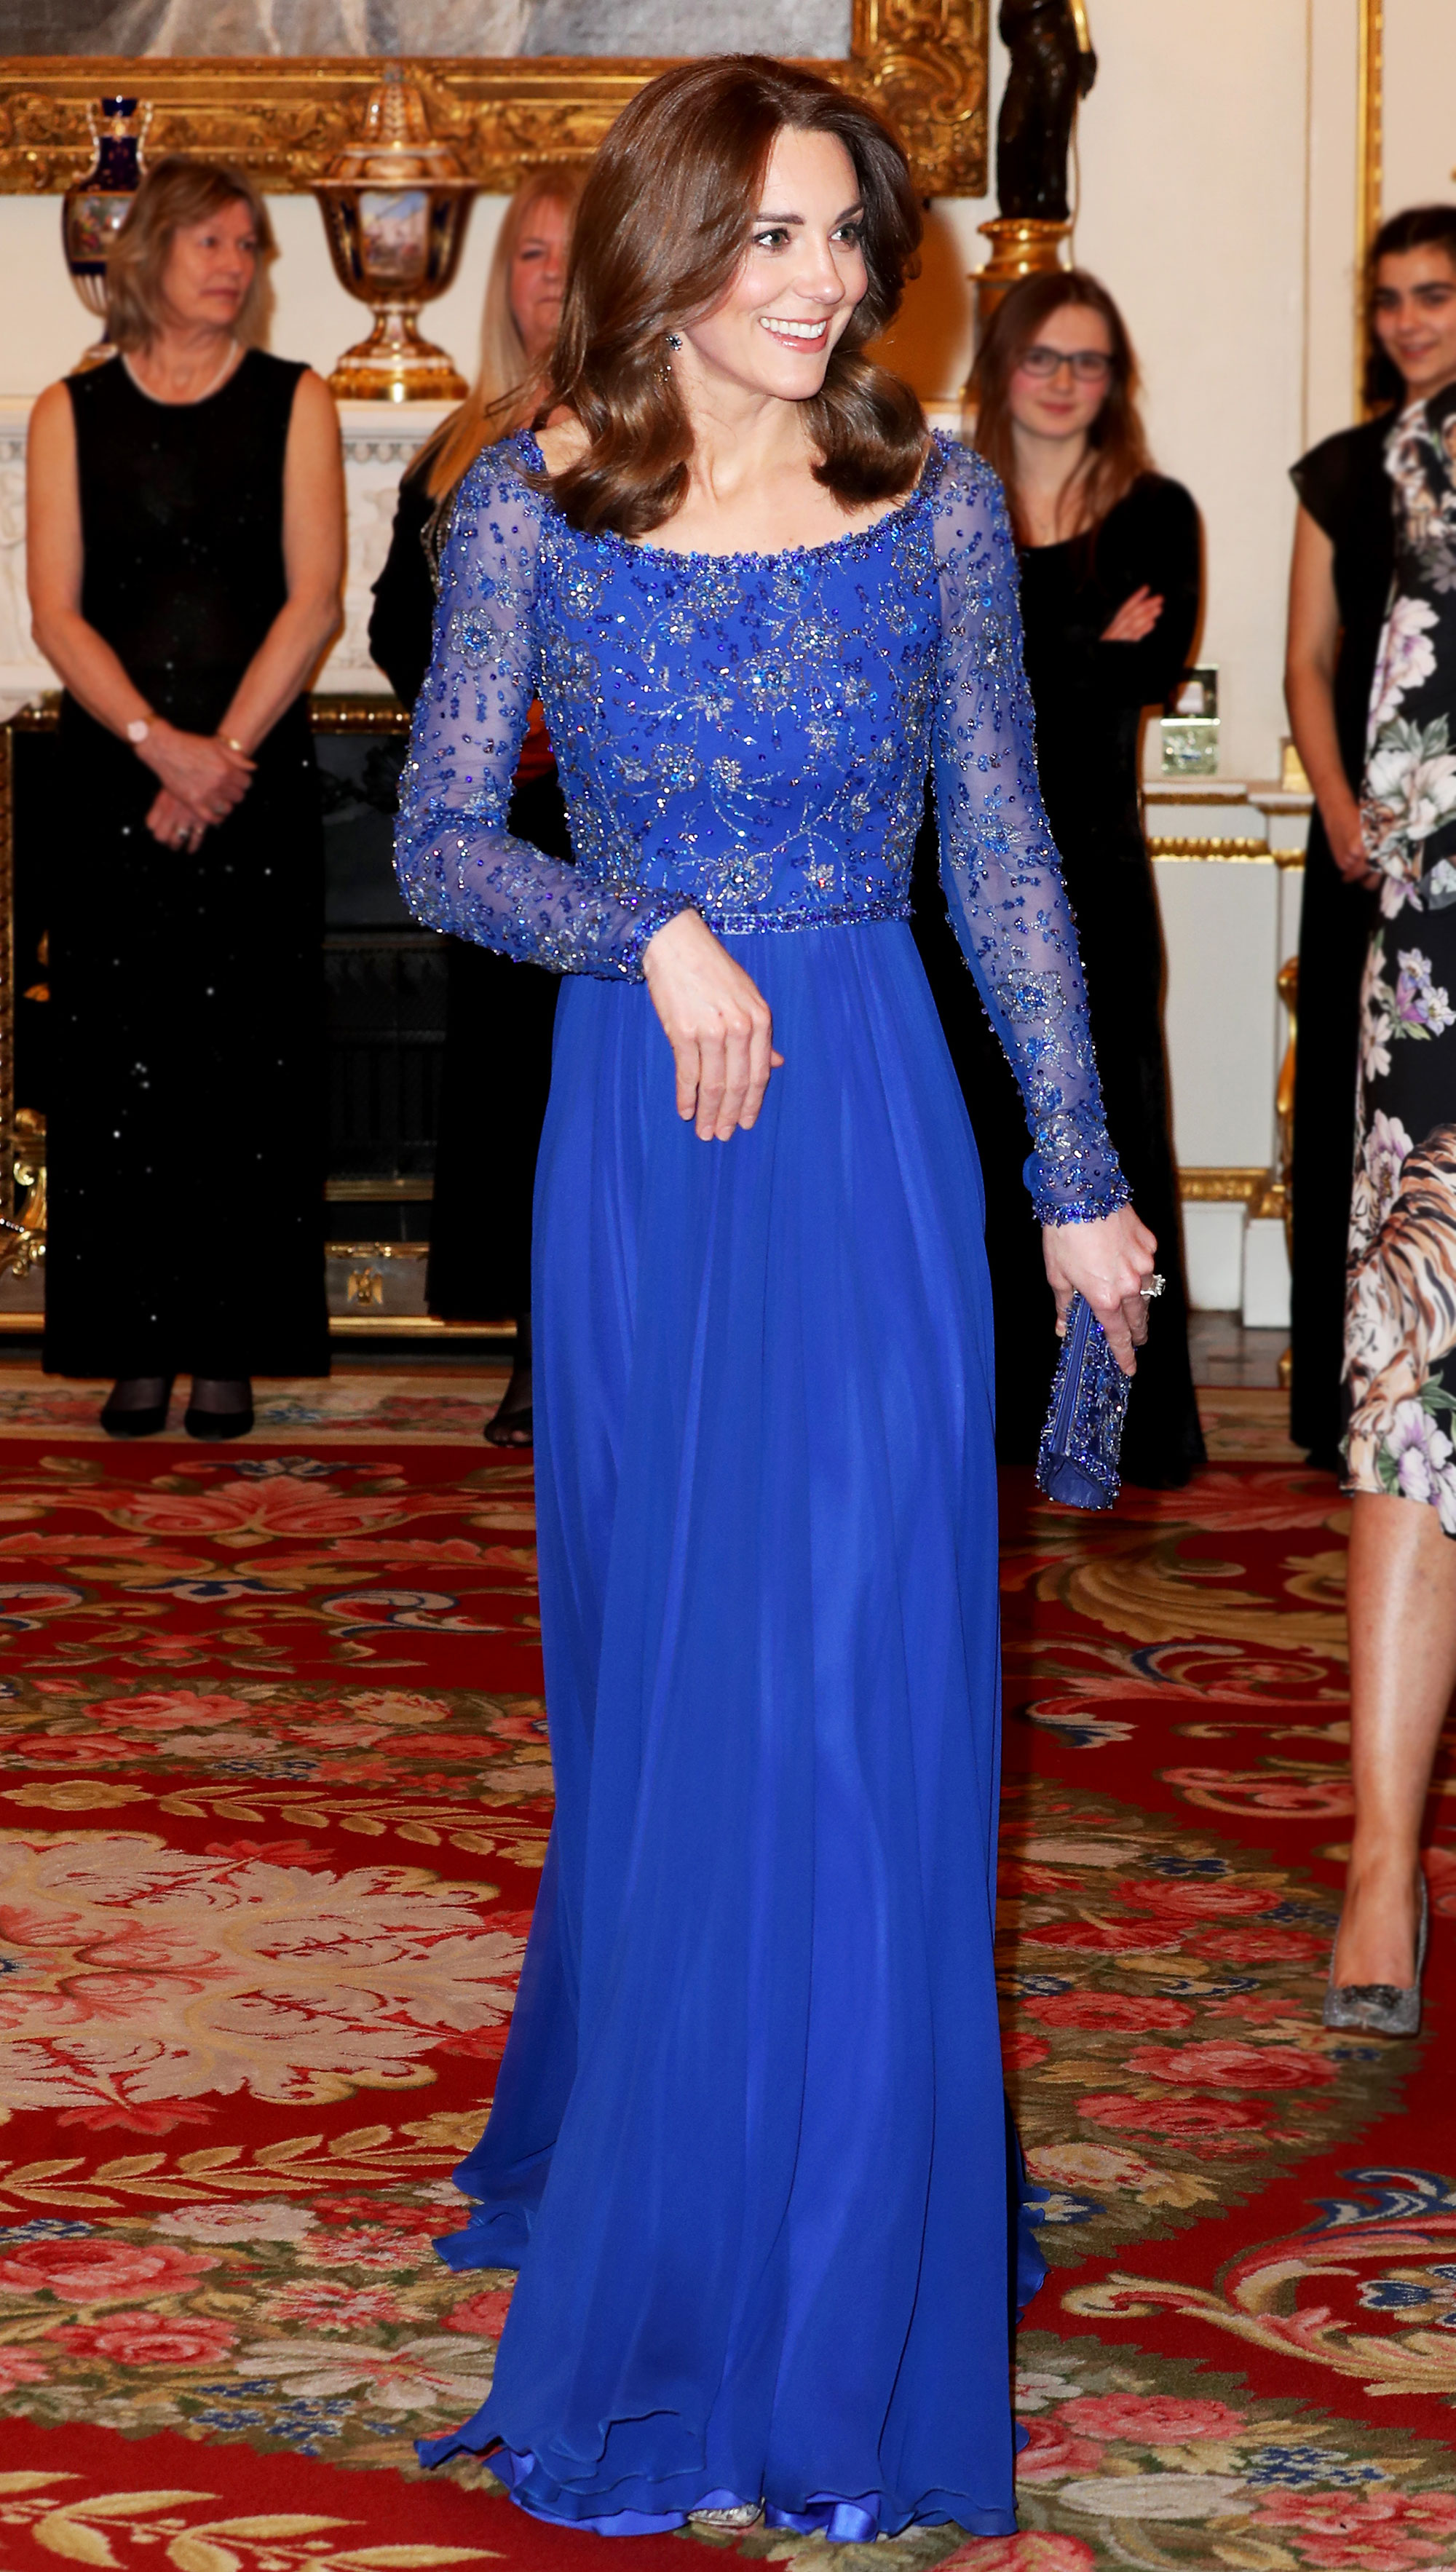 Jenny Packham design worn by Kate Middleton goes on general sale for £4,000  | Daily Mail Online